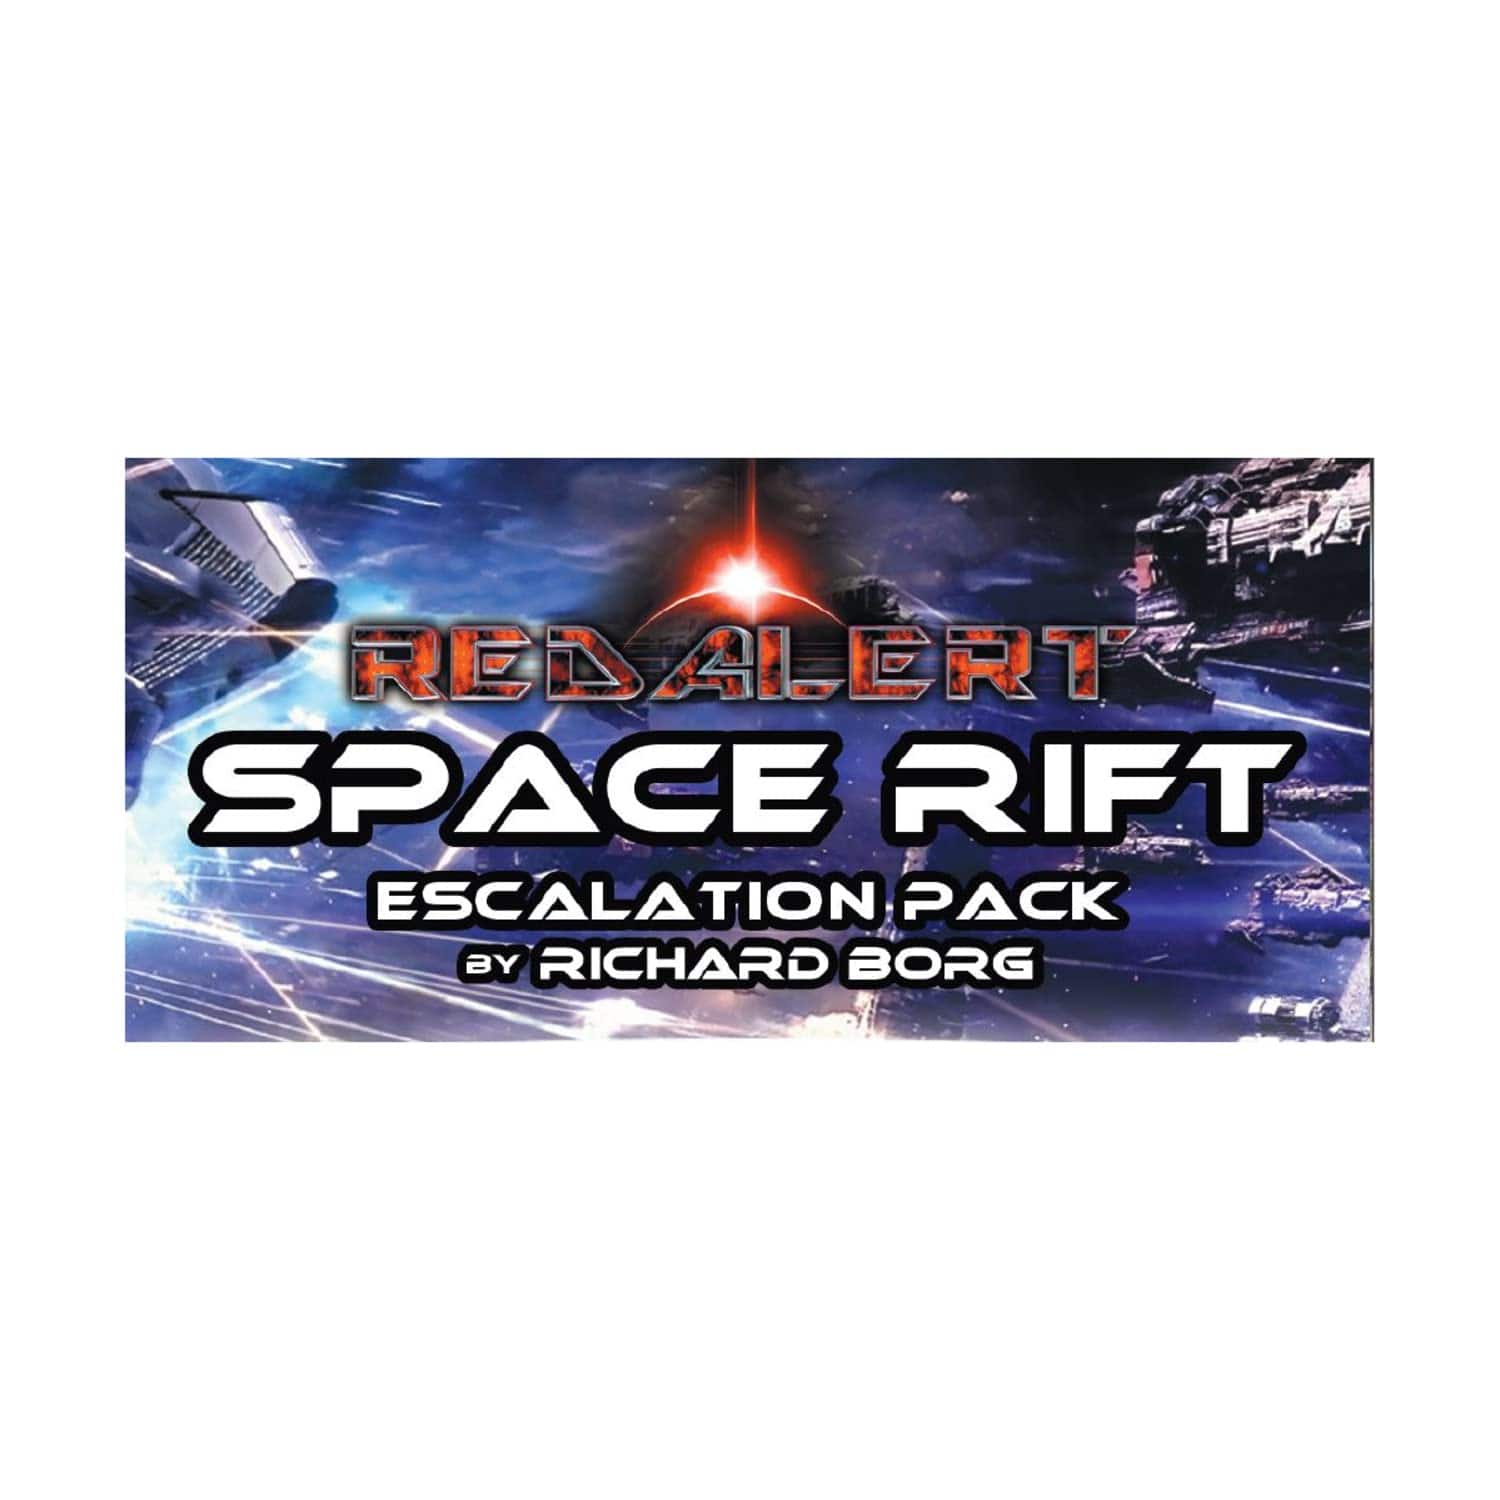 Plastic Soldier Company Board Games Plastic Soldier Company Red Alert: Space Rift Escalation Pack